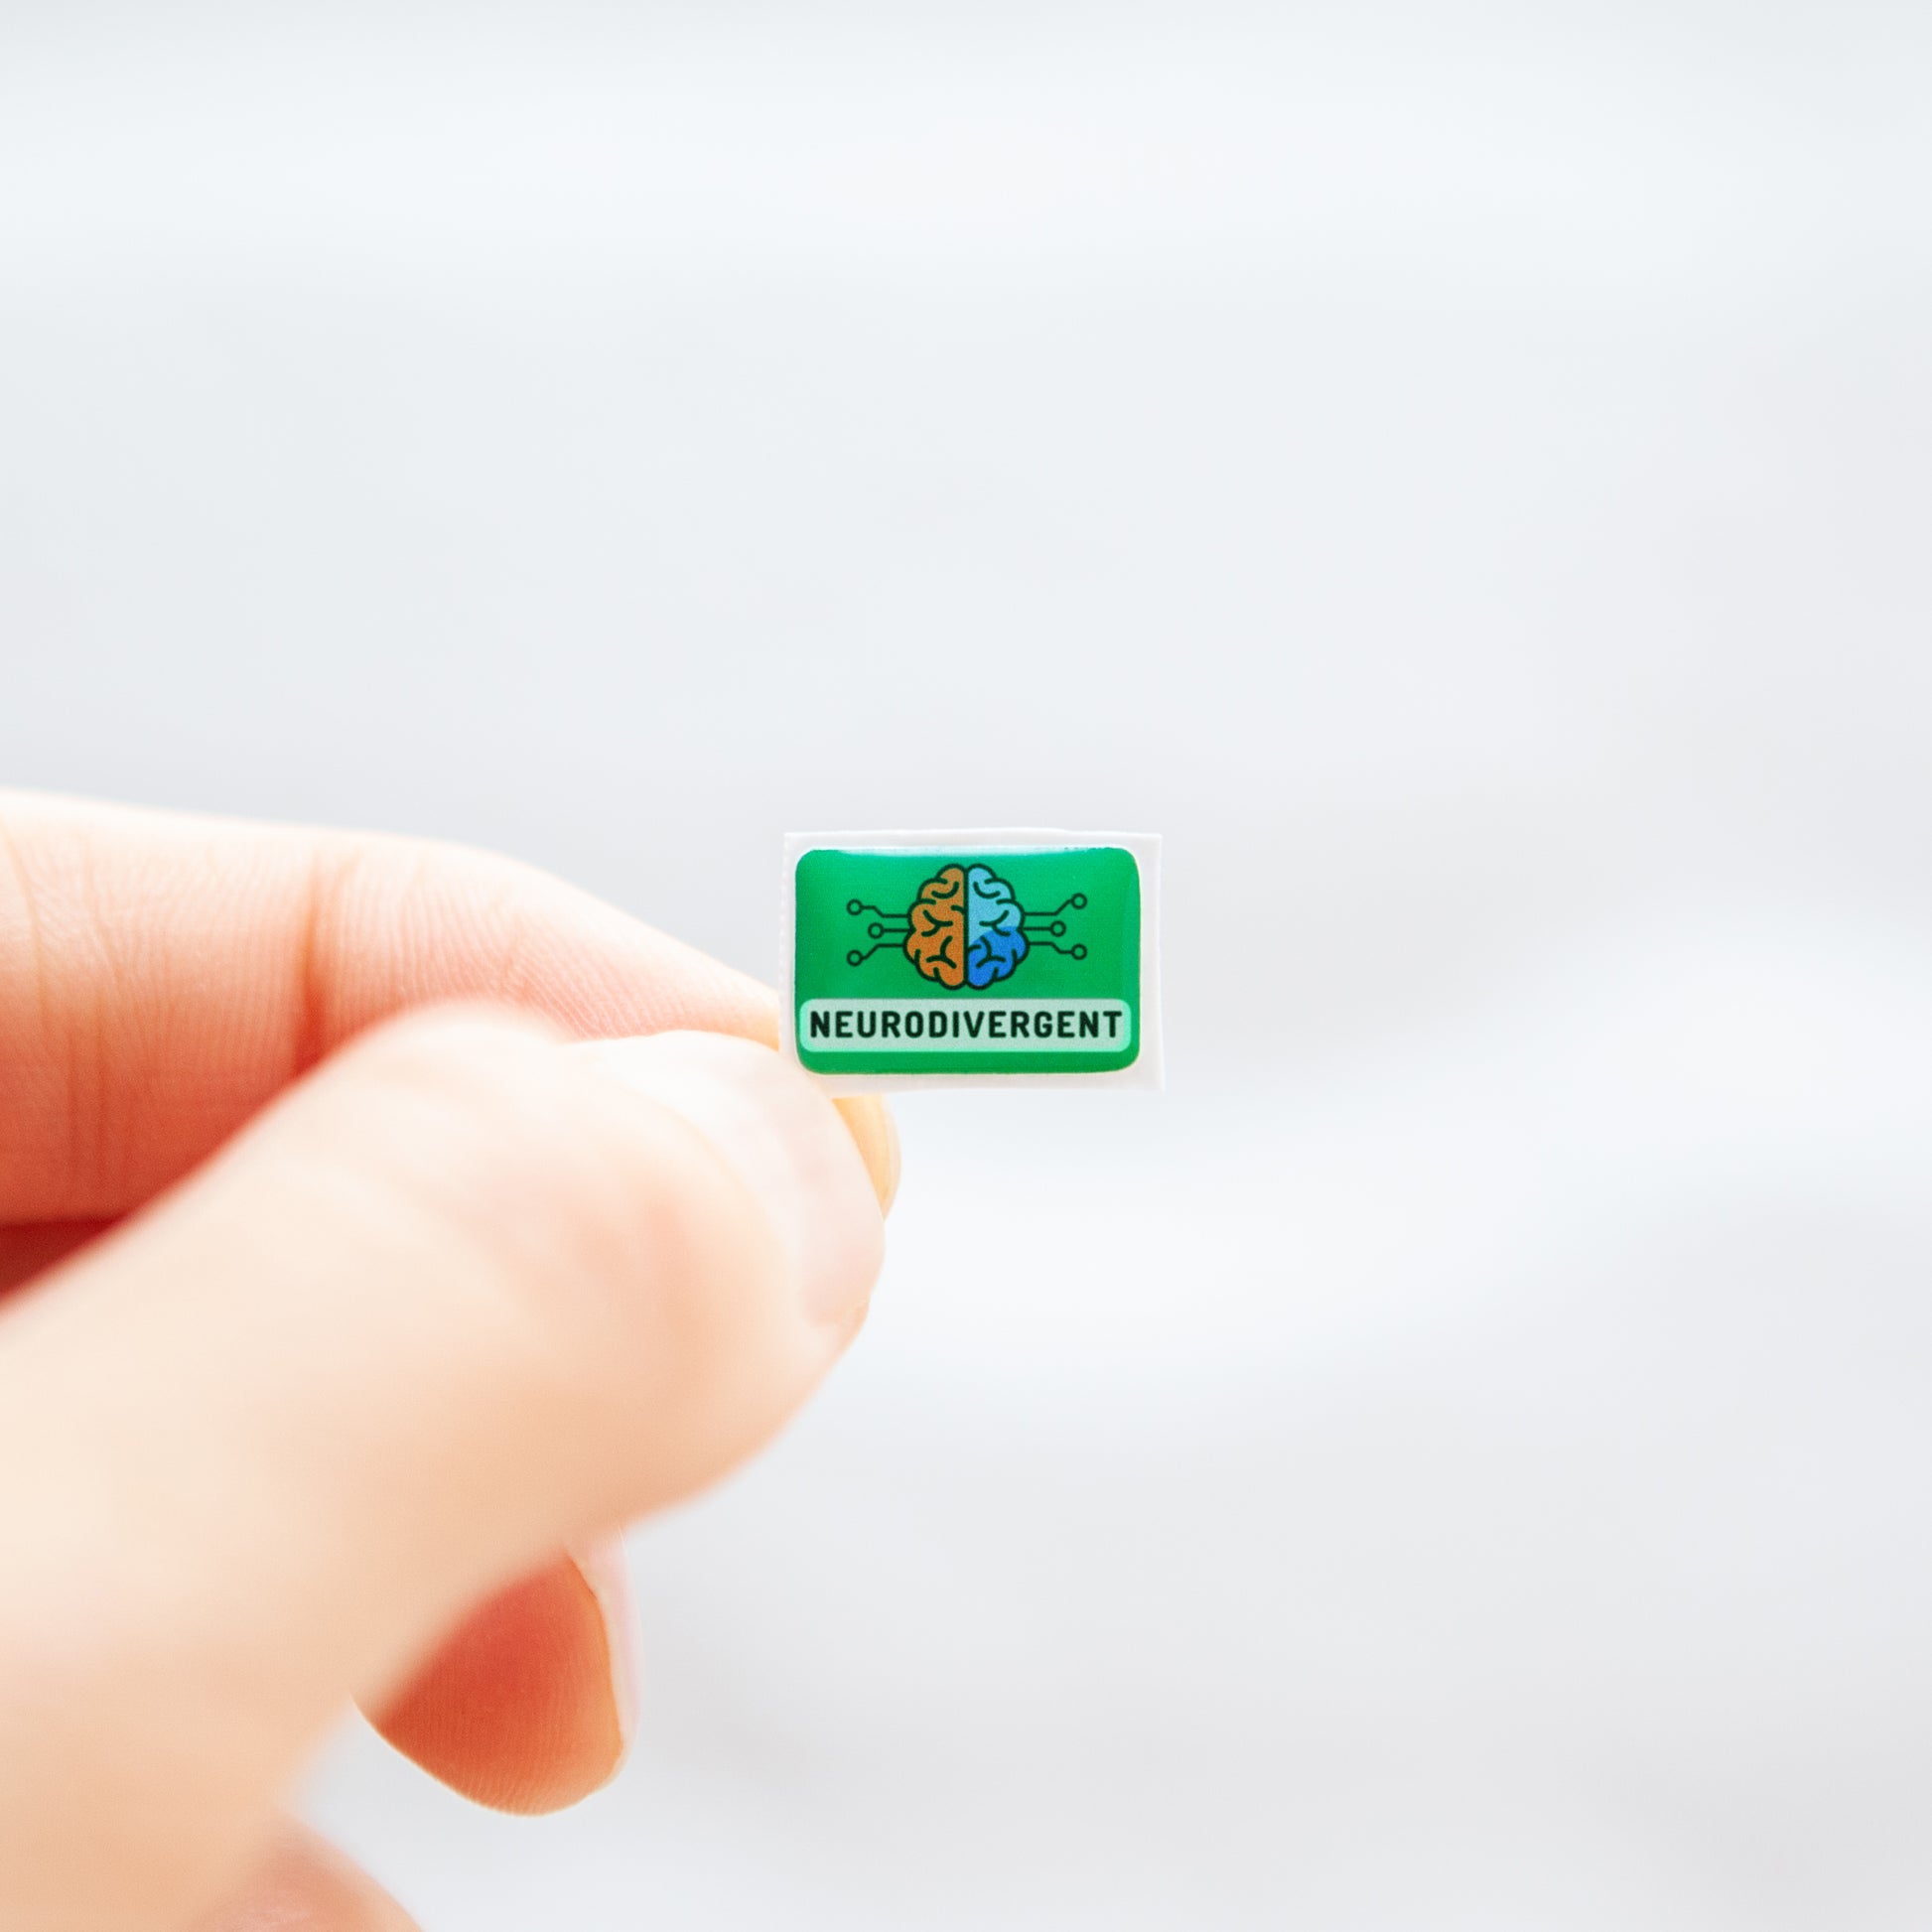 Fingers holding a green sticker, with 'Neurodivergent' text, and a digitally illustrated image of a brain, representing neurodivergent stickers.